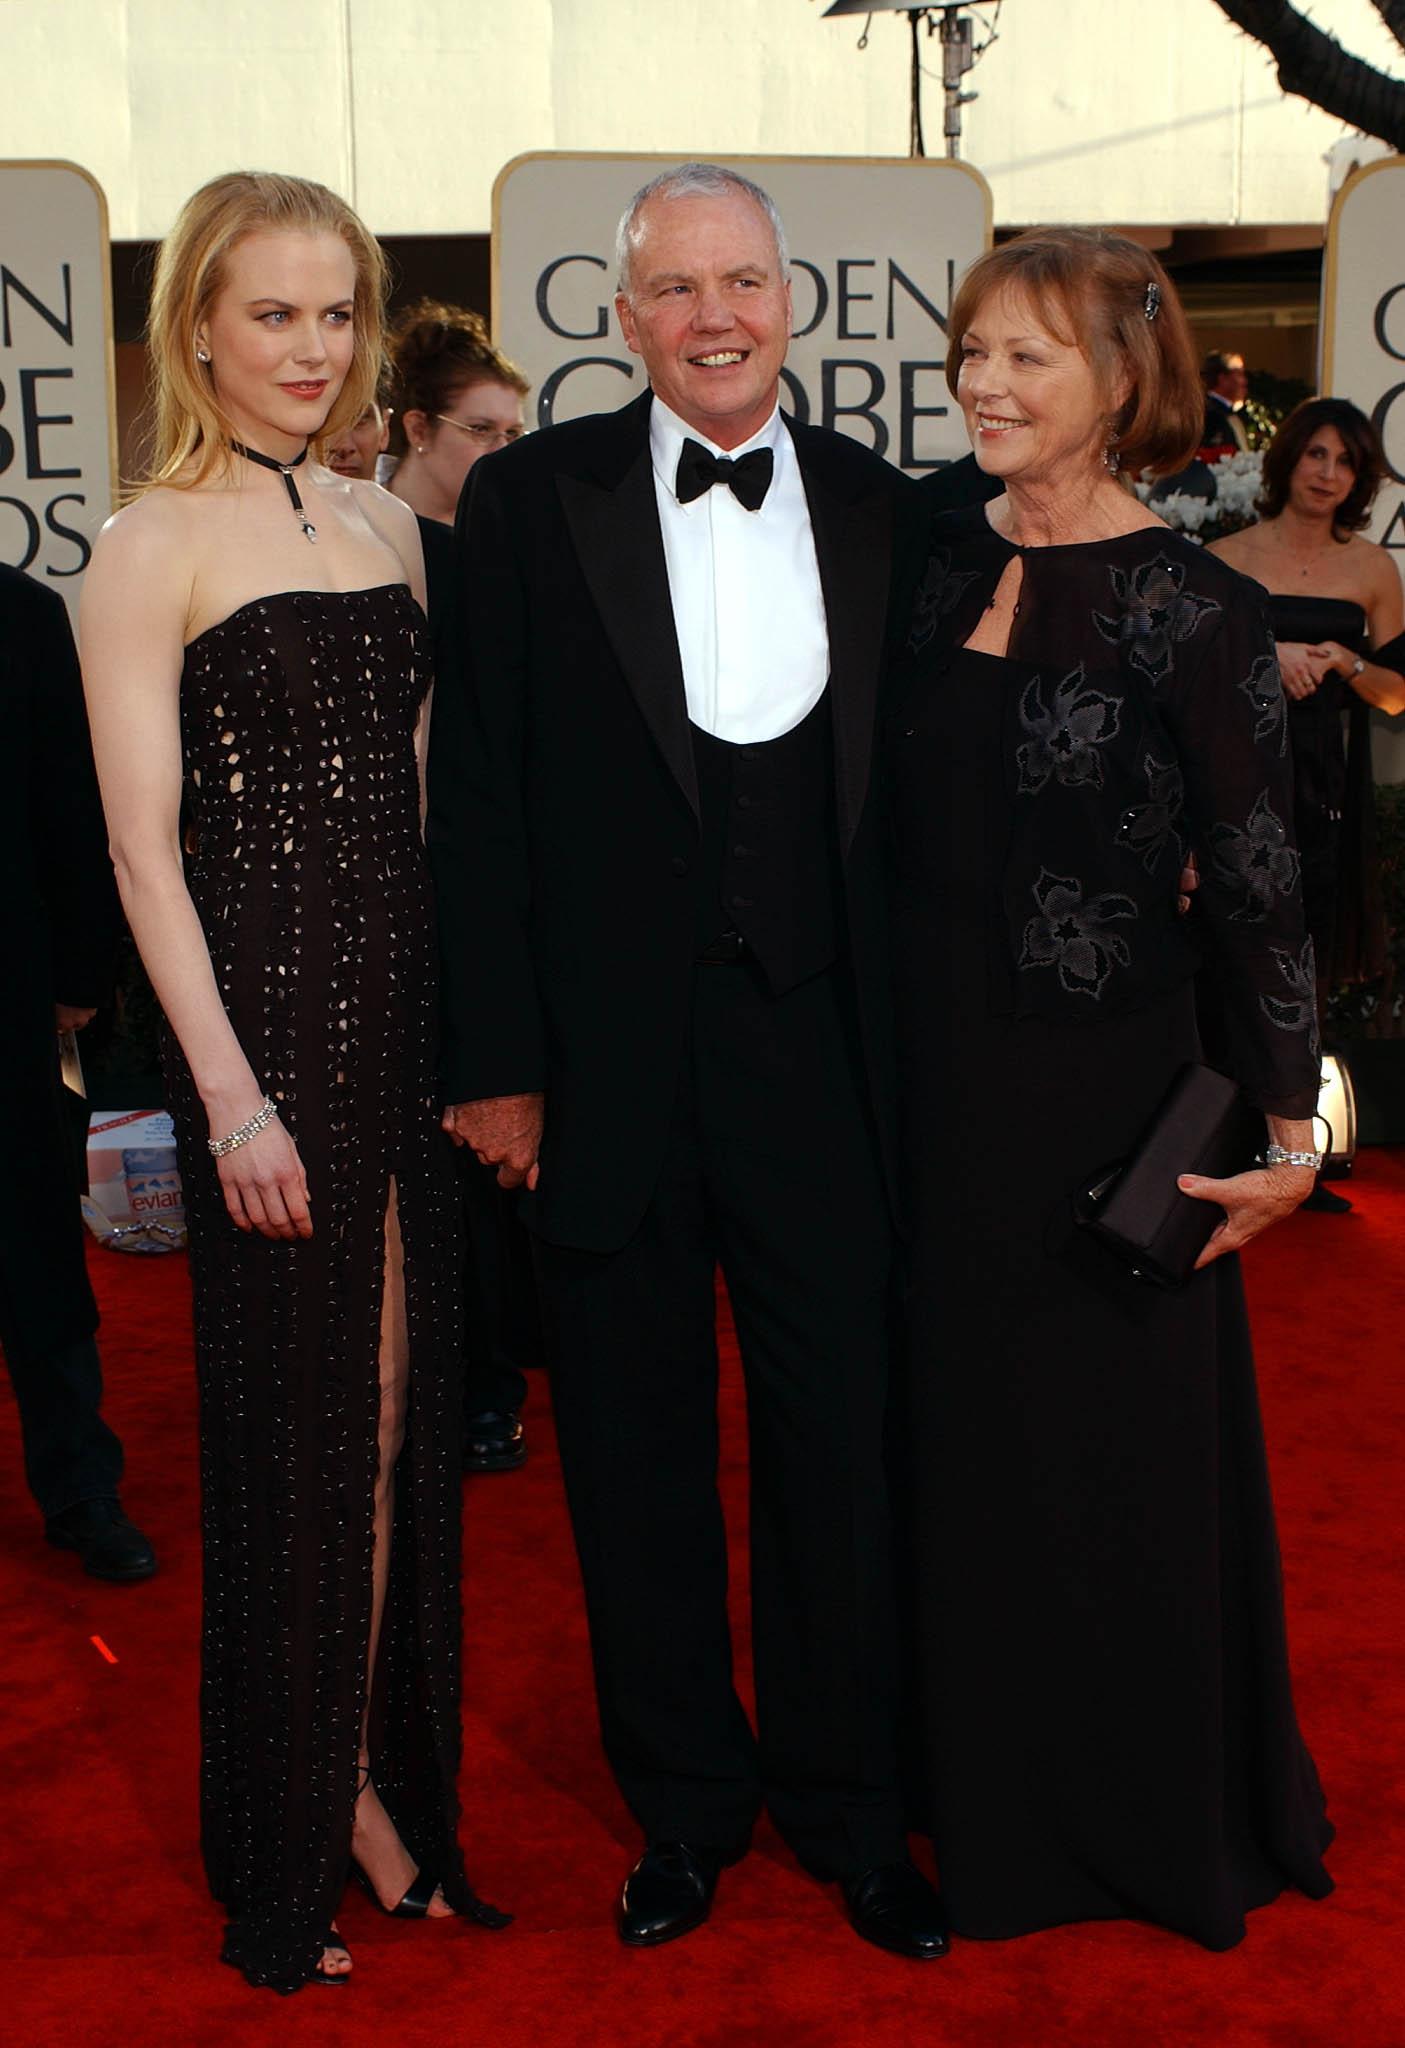 Nicole Kidman and her parents Antony and Janelle Kidman arrive at the 59th Annual Golden Globe Awards at the Beverly Hilton in Beverly Hills in 2002. (Lucy Nicholson--AFP/Getty Images)